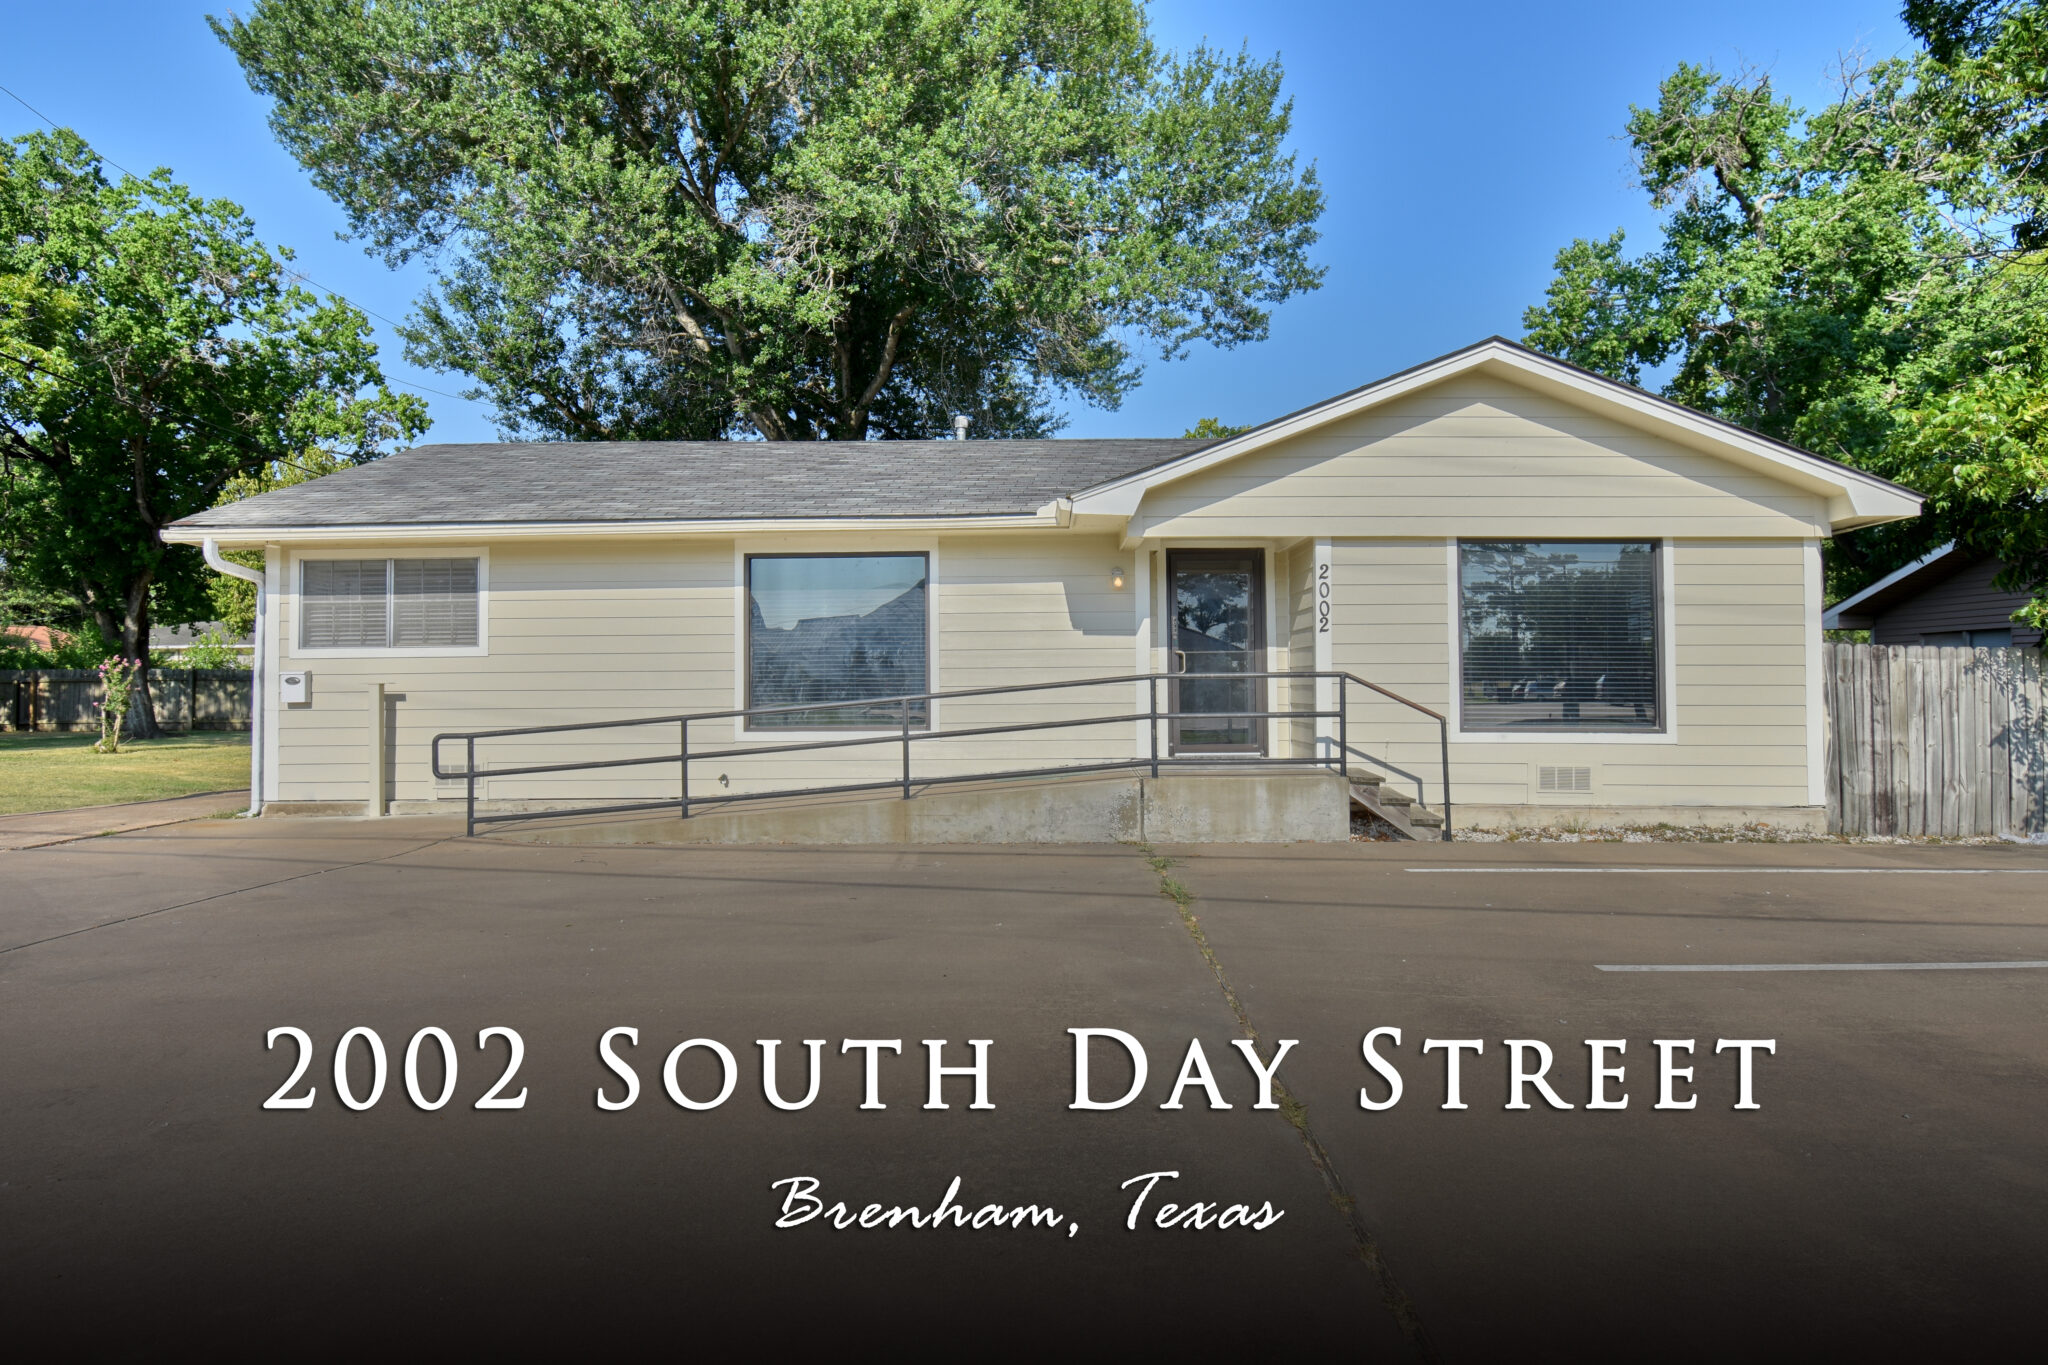 2002 South Day Street